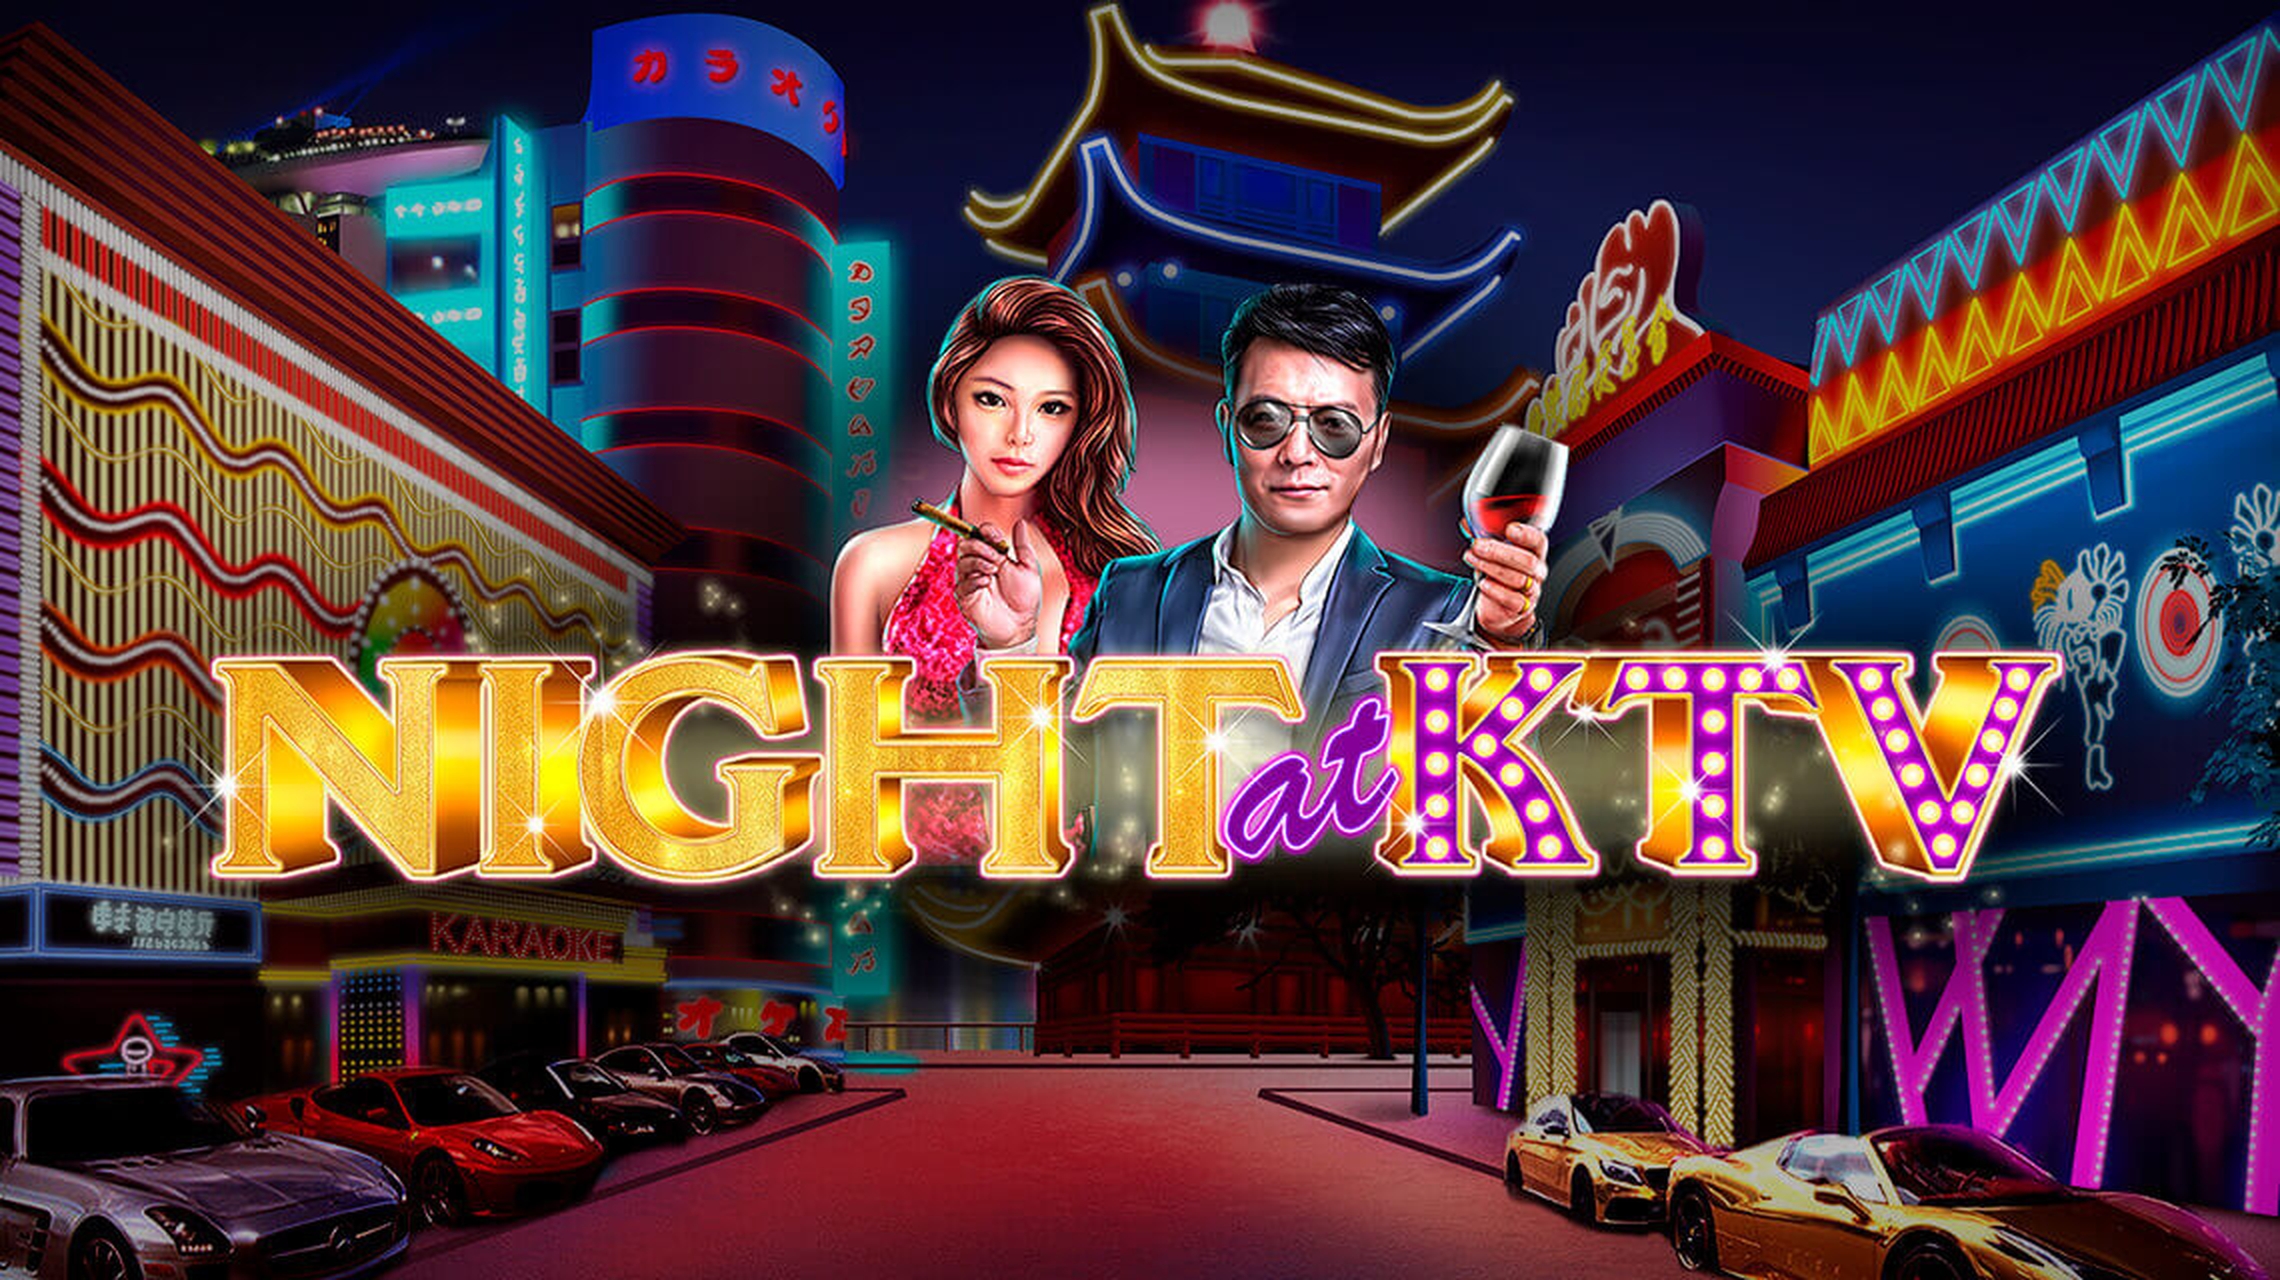 The Night at KTV Online Slot Demo Game by GameArt